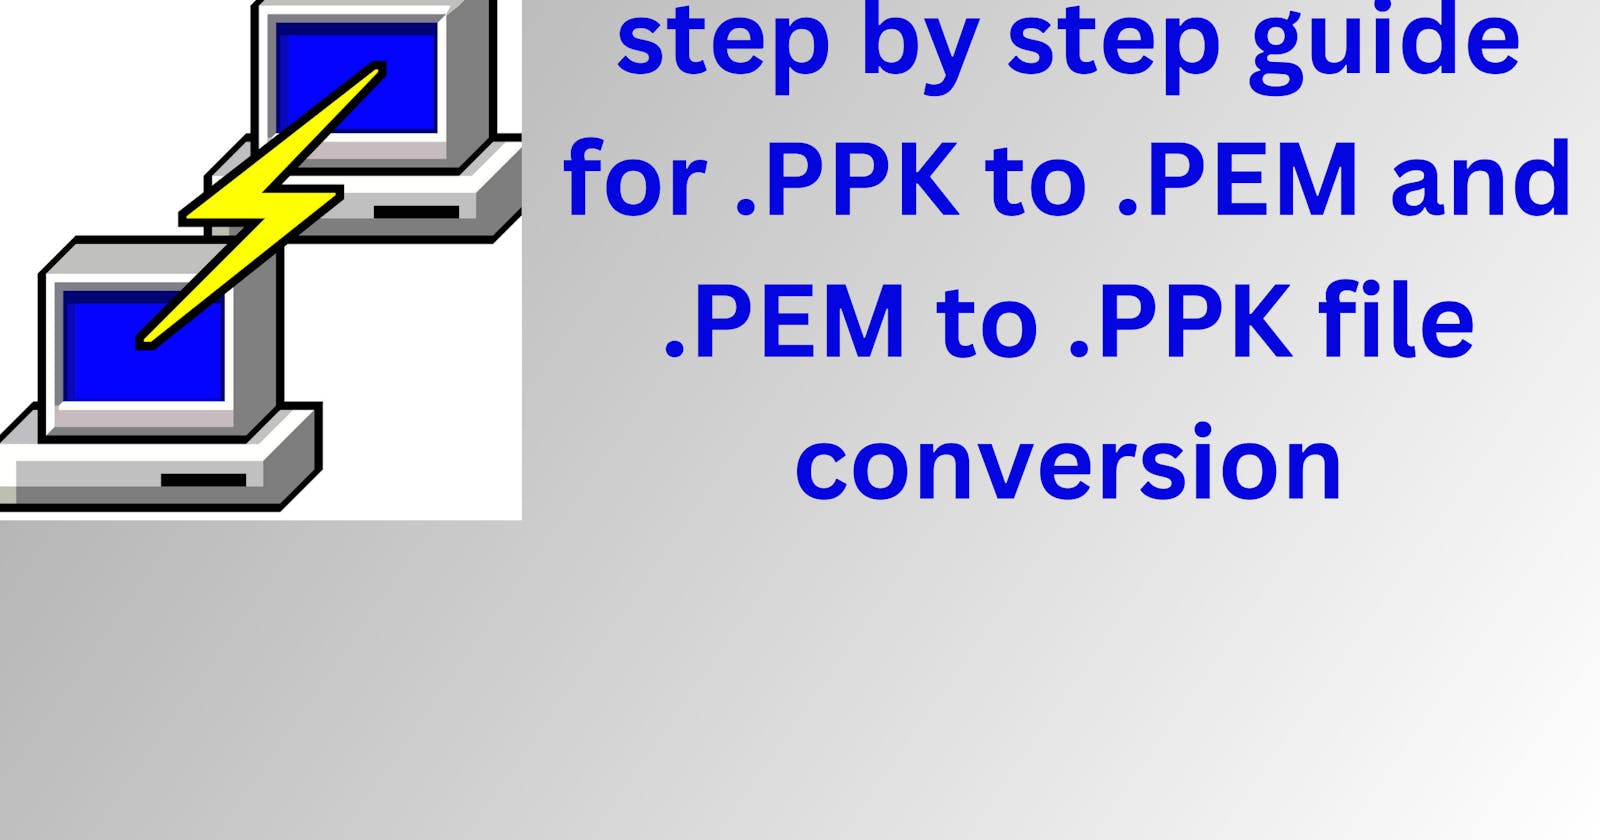 Guide to convert PEM to PPK file and PPK to PEM file